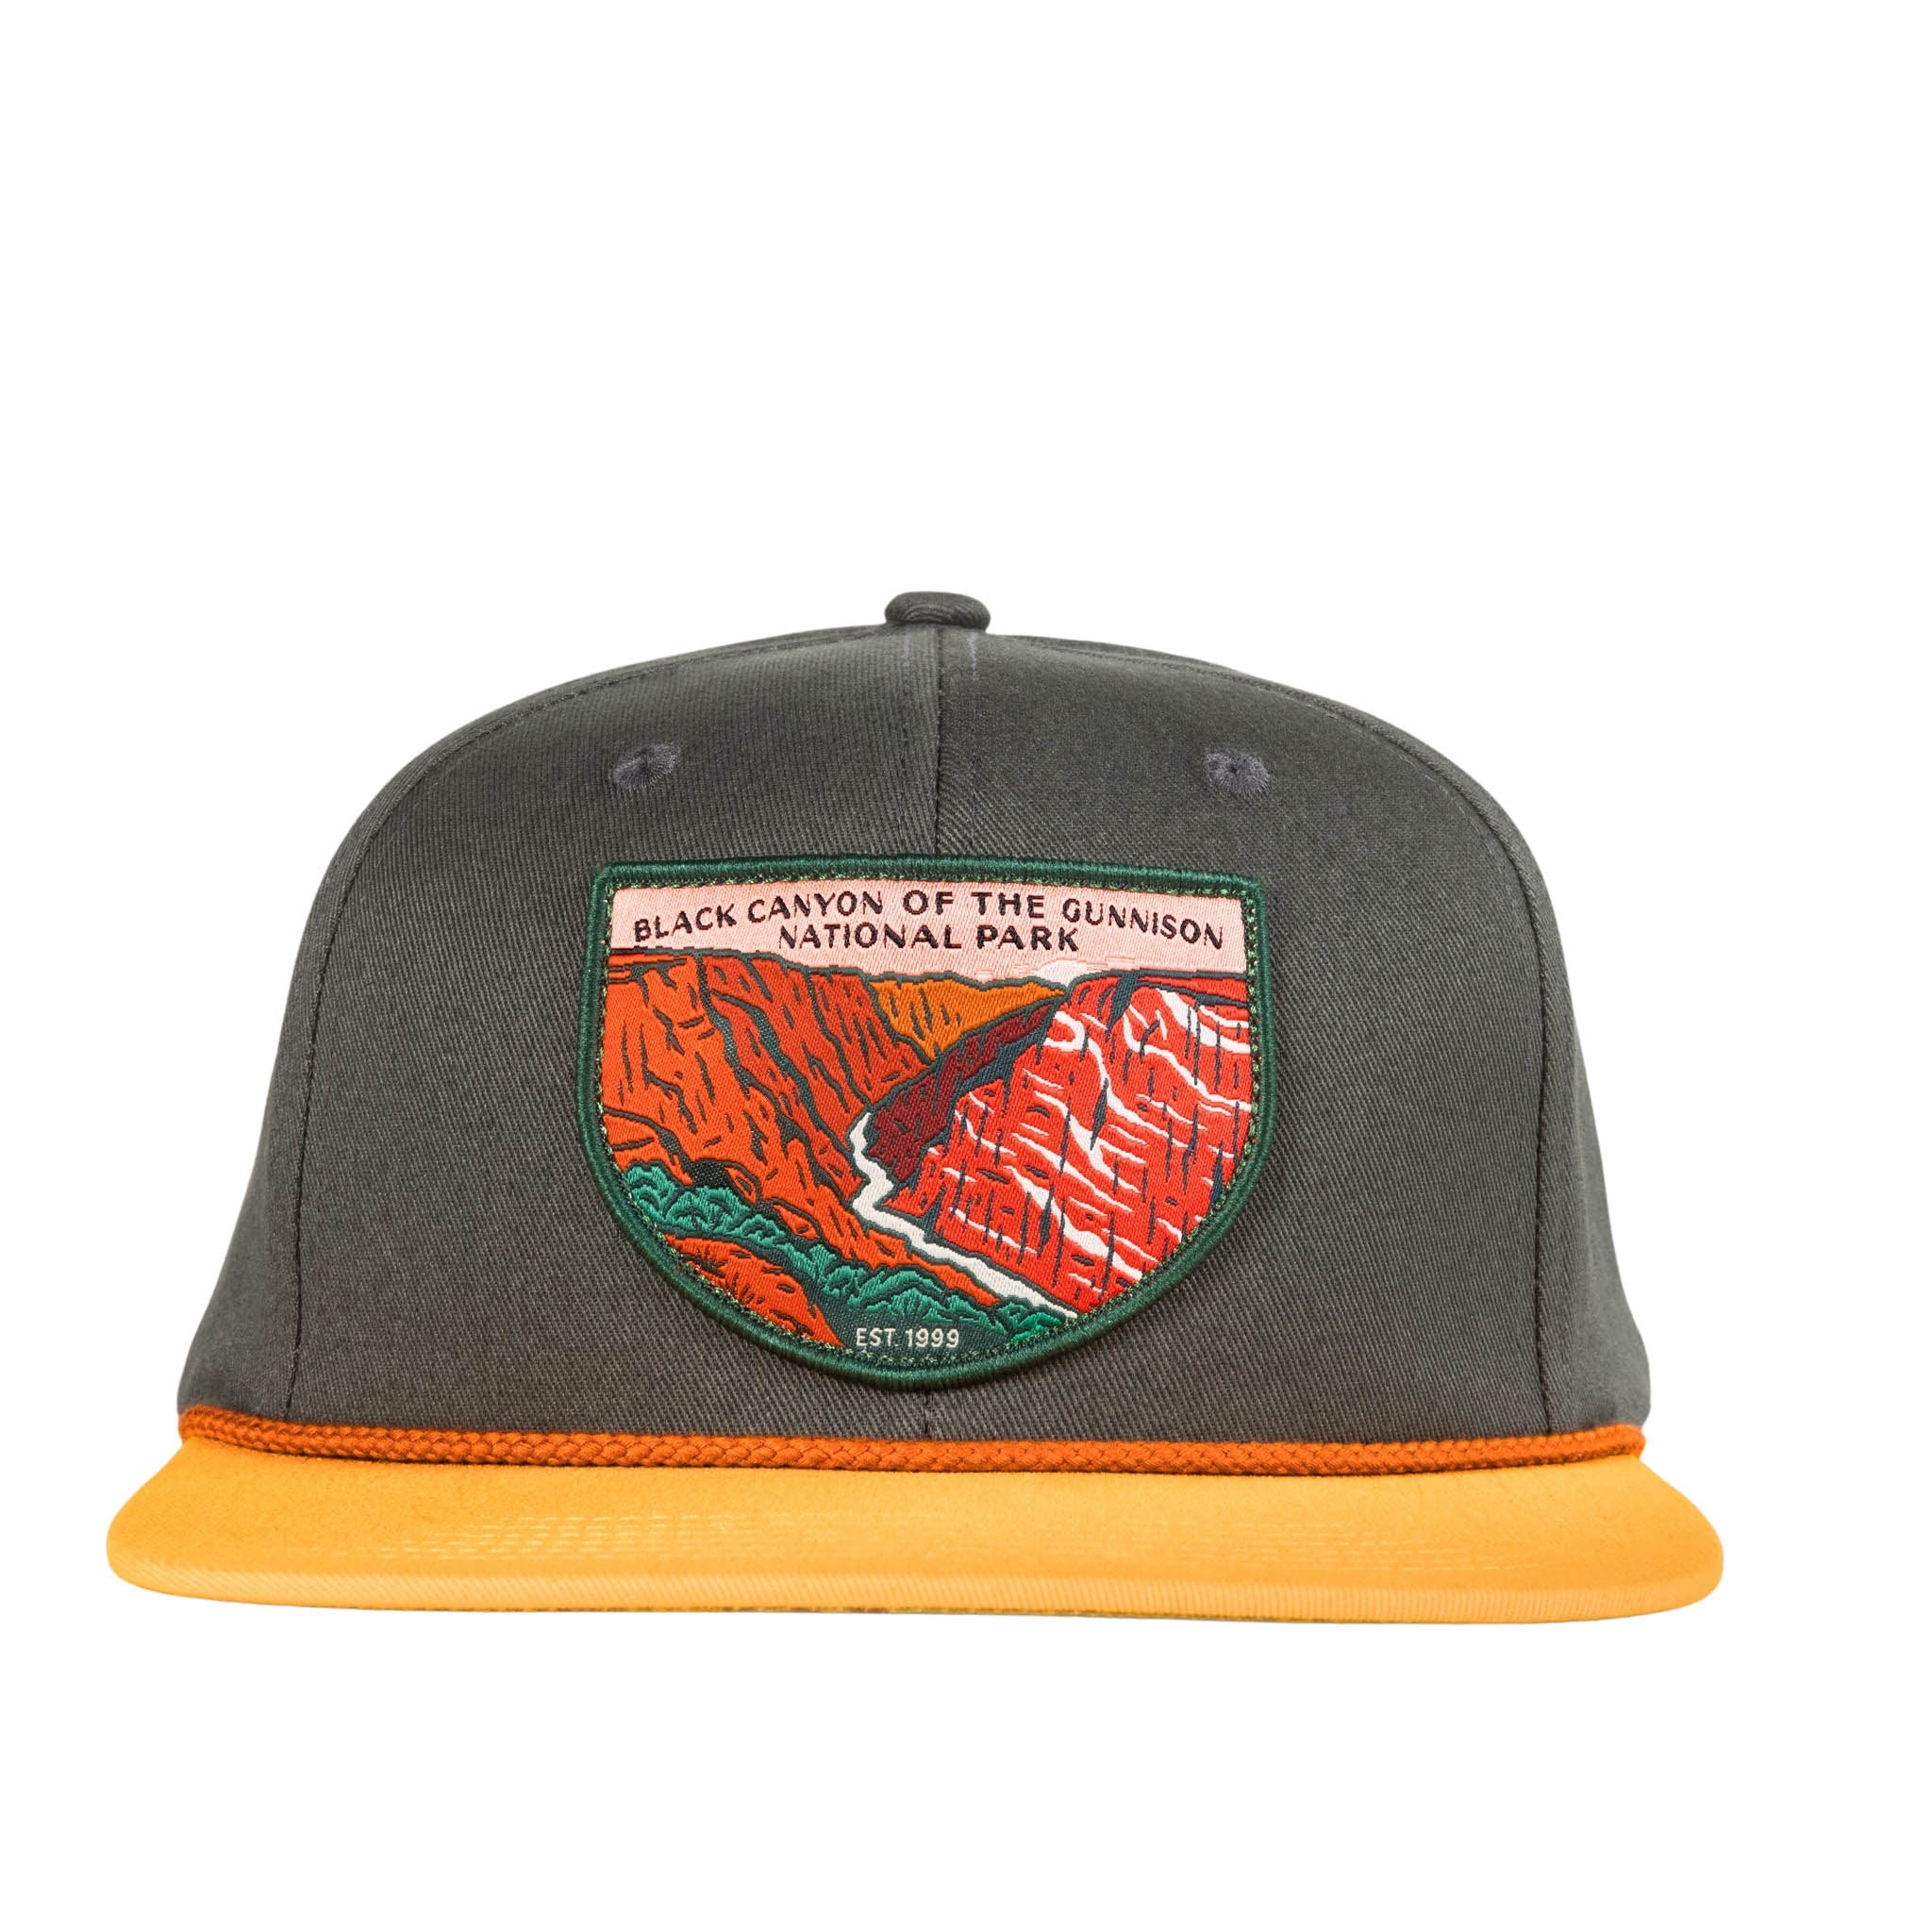 Black Canyon of the Gunnison National Park Hat